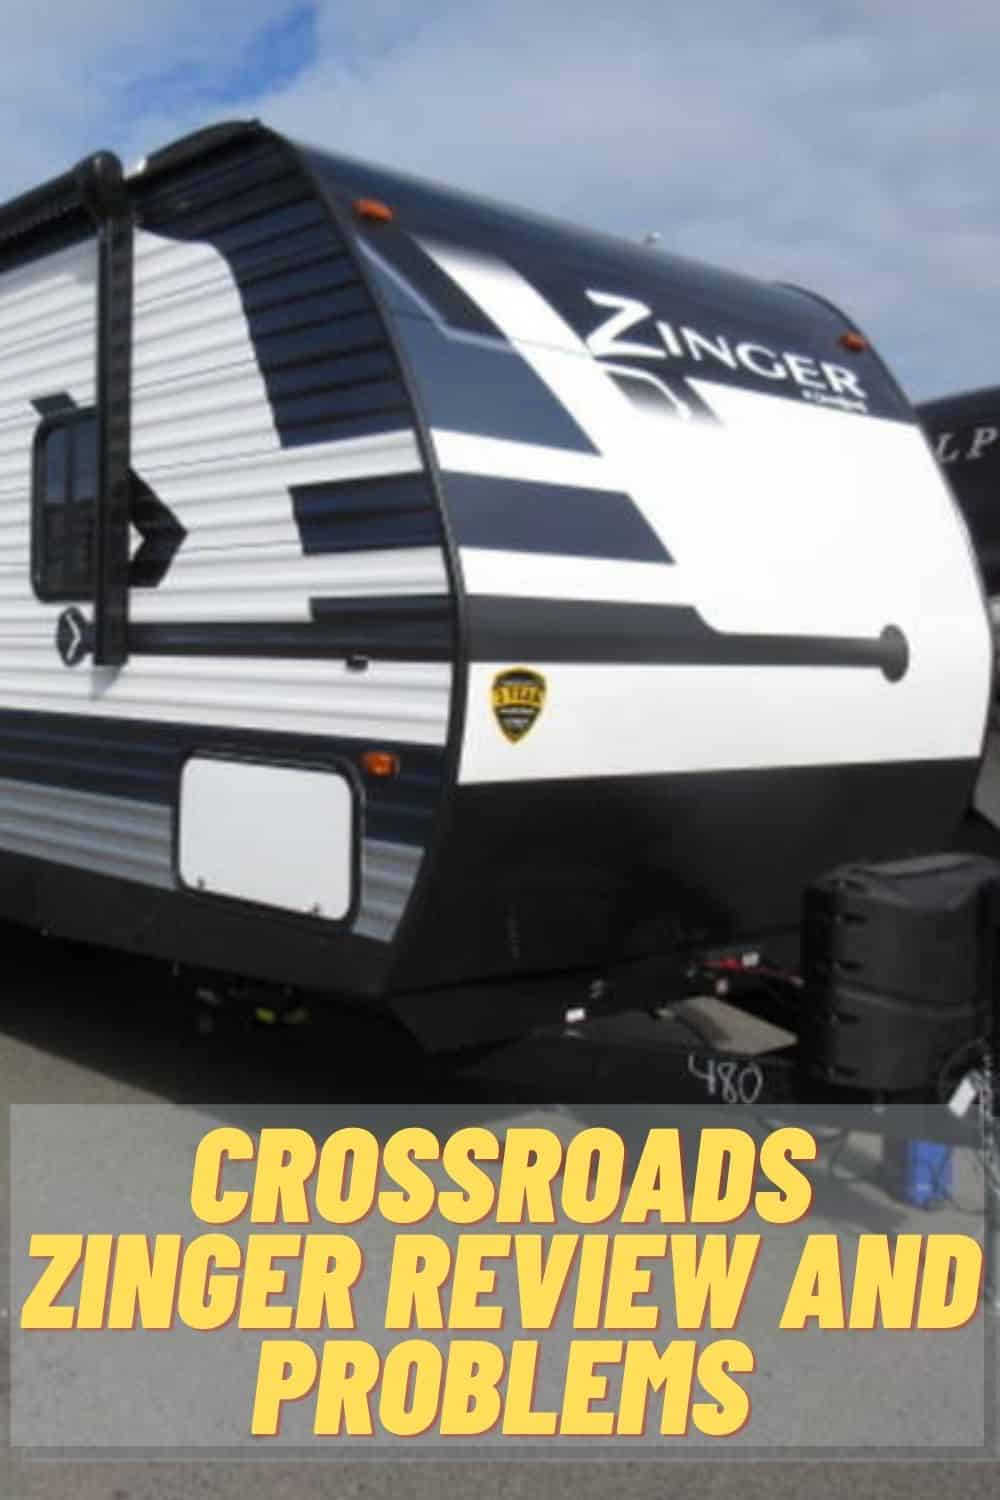 Crossroads Zinger Reviews and Problems (Updated 2022)